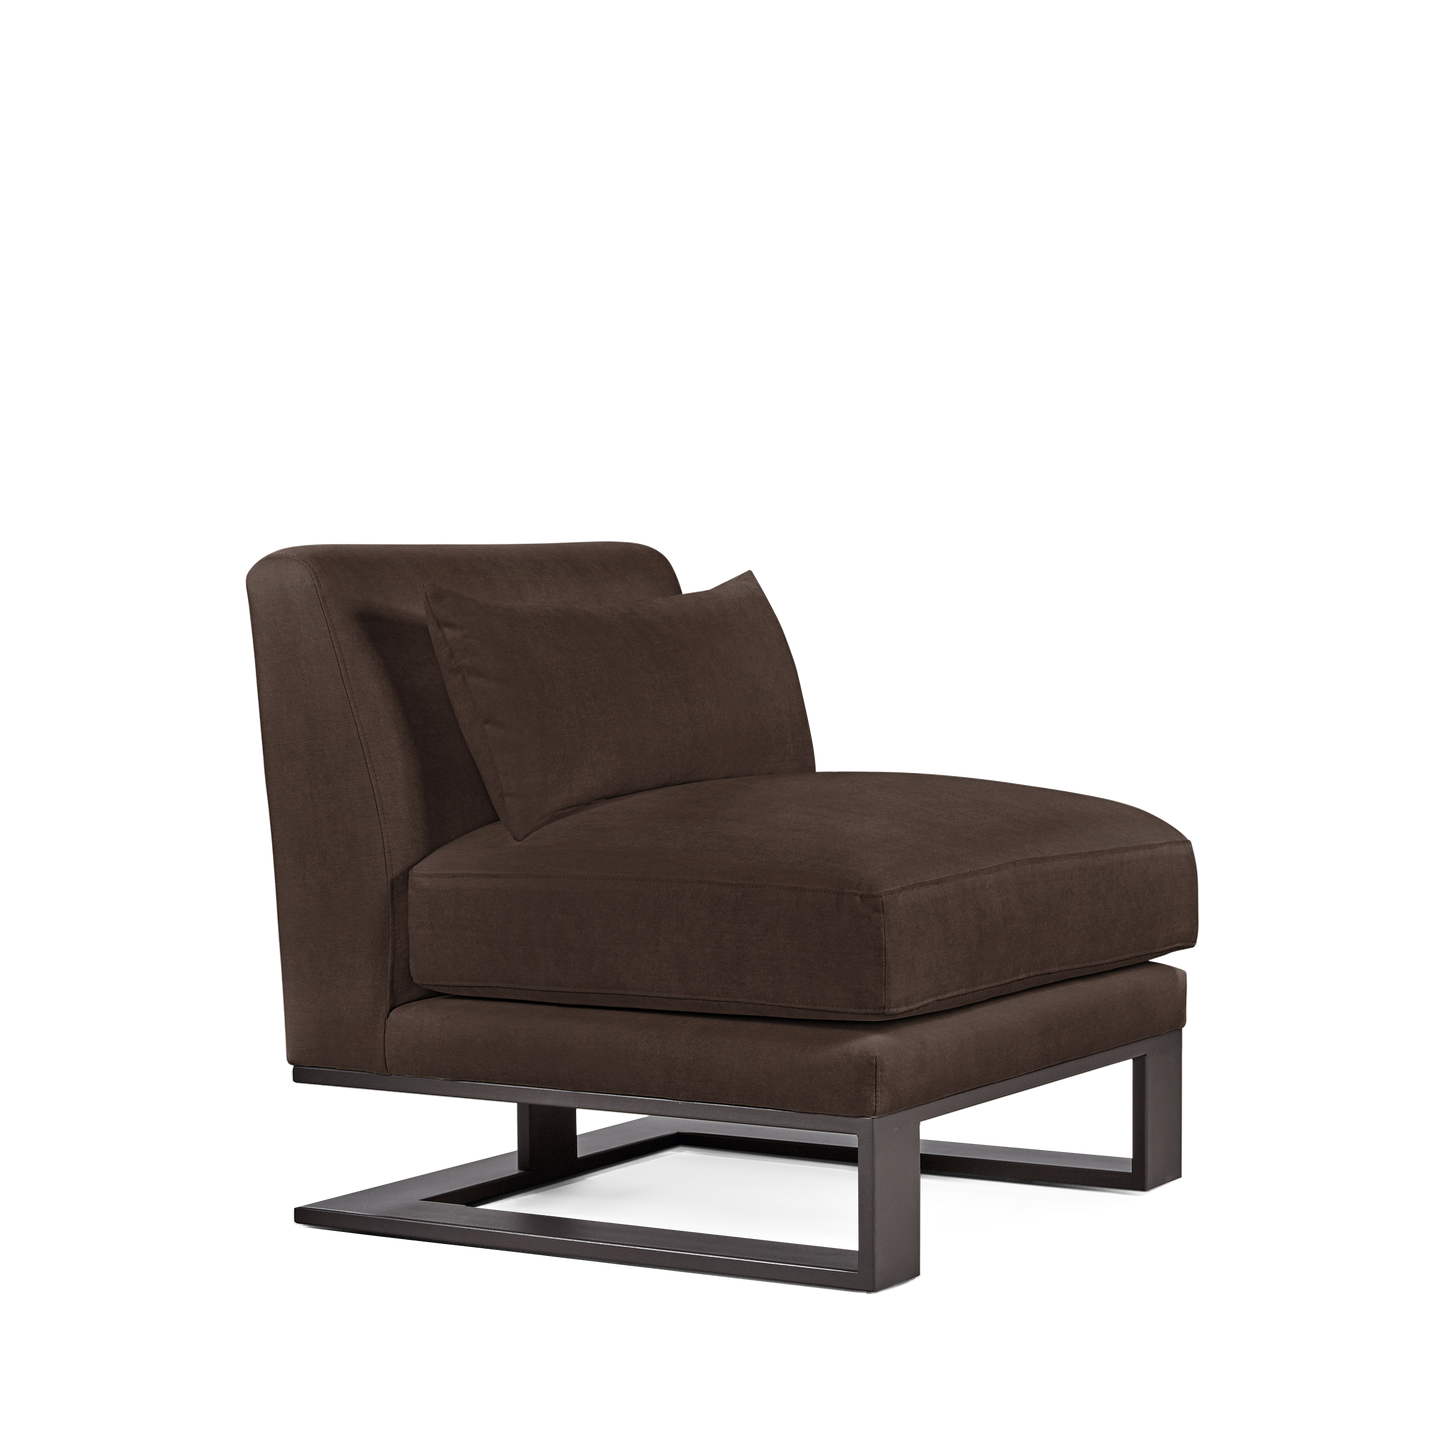 Alpes armchair with suede brown textile and moka colored wood legs 